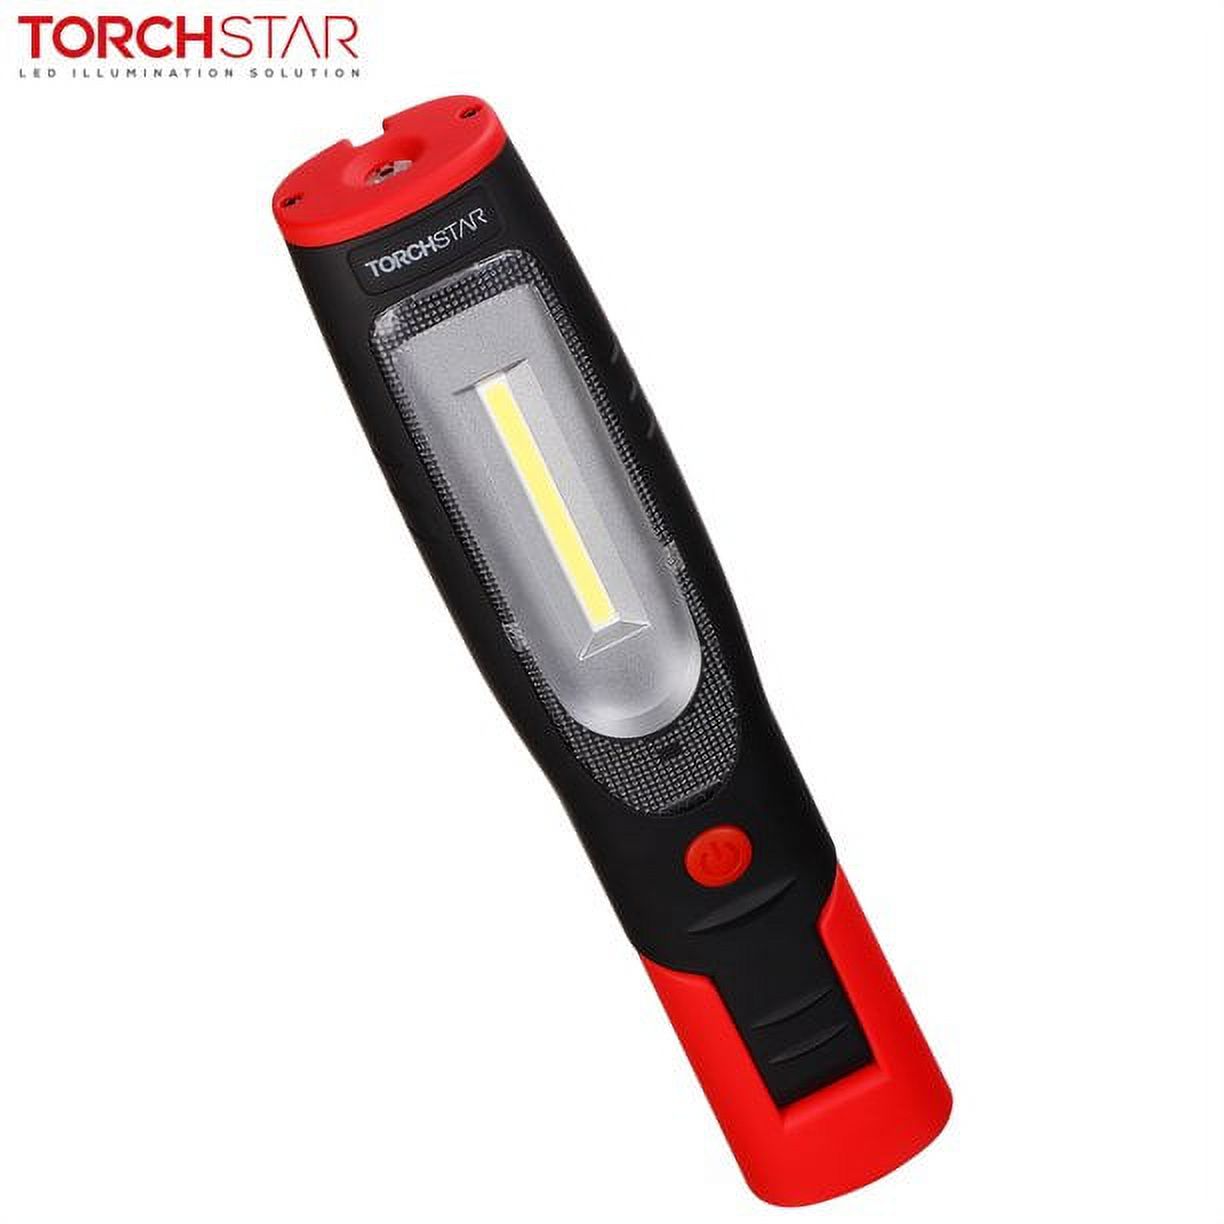 TORCHSTAR Rechargeable LED Work Light, UL-listed Power Supply, USB Charging Port, Dual Magnetic Bases & 360° Rotate Hanging Hooks, Handheld Flashlight, for Camping, Car Repairing, Emergency Lighting - image 1 of 9